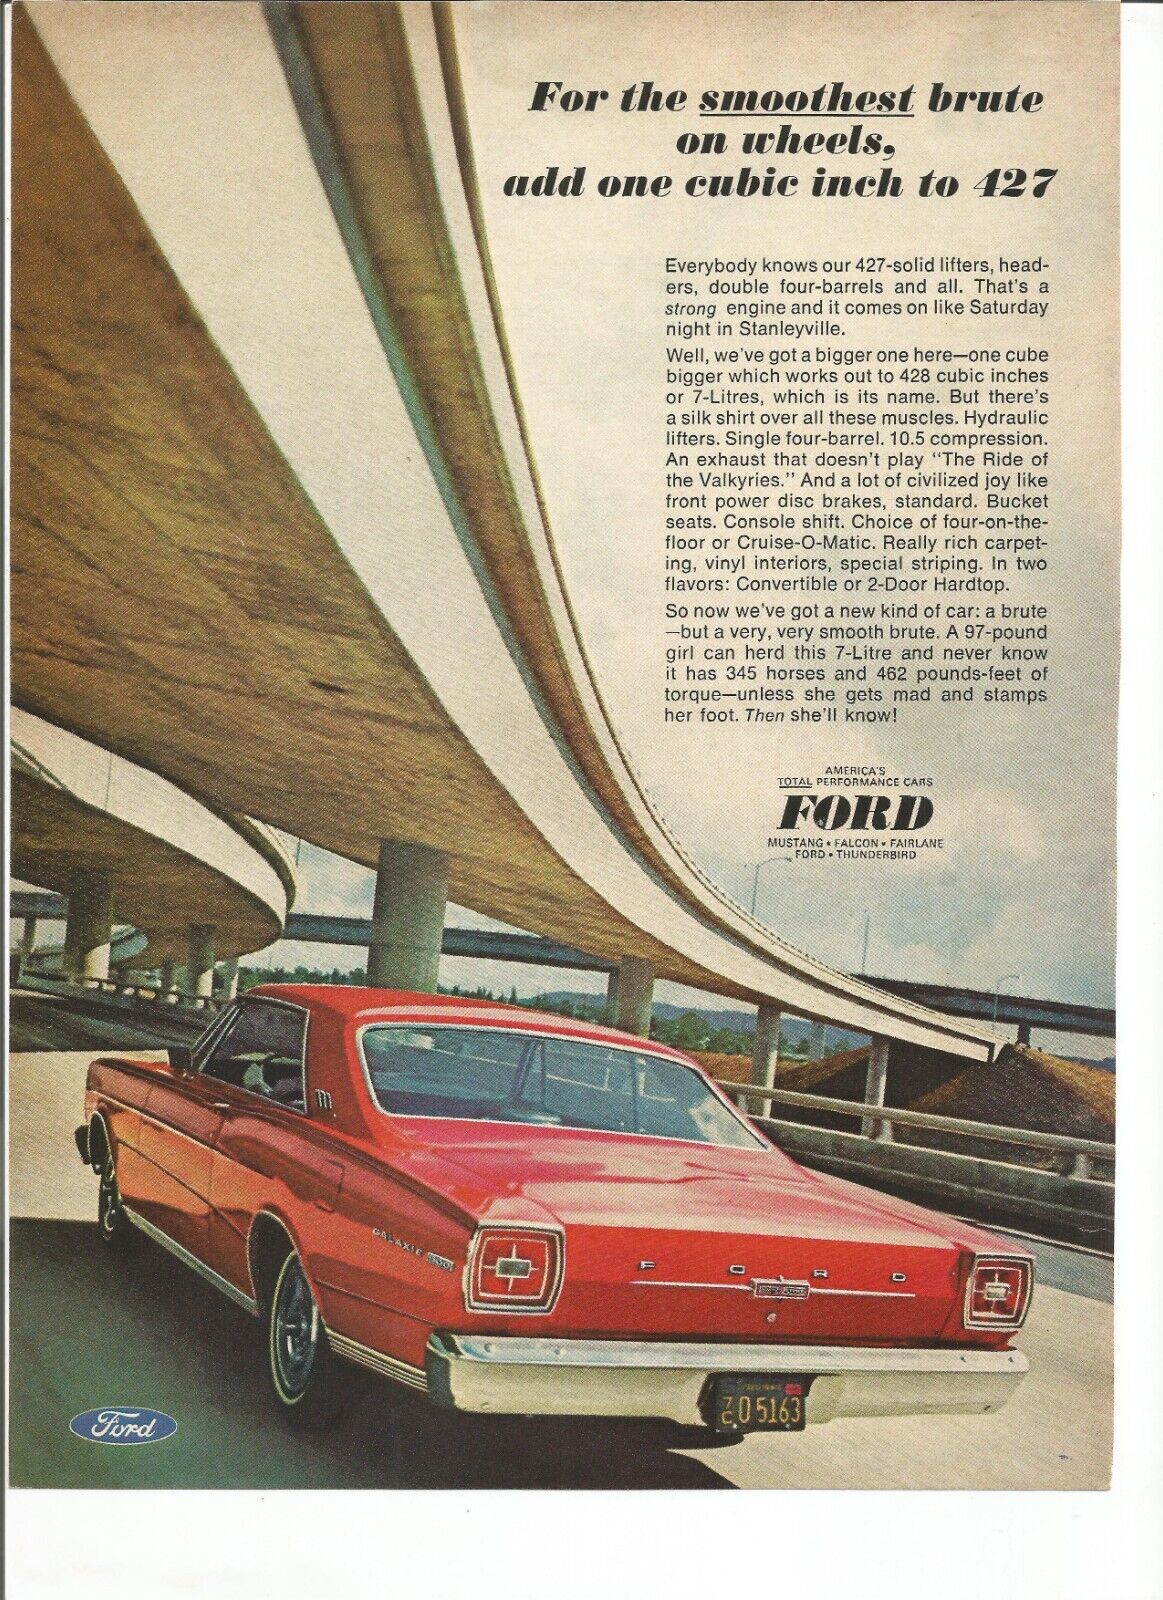 Original 1966 Ford Galaxie 7 Litre vintage print ad:  add one cubic inch to 427